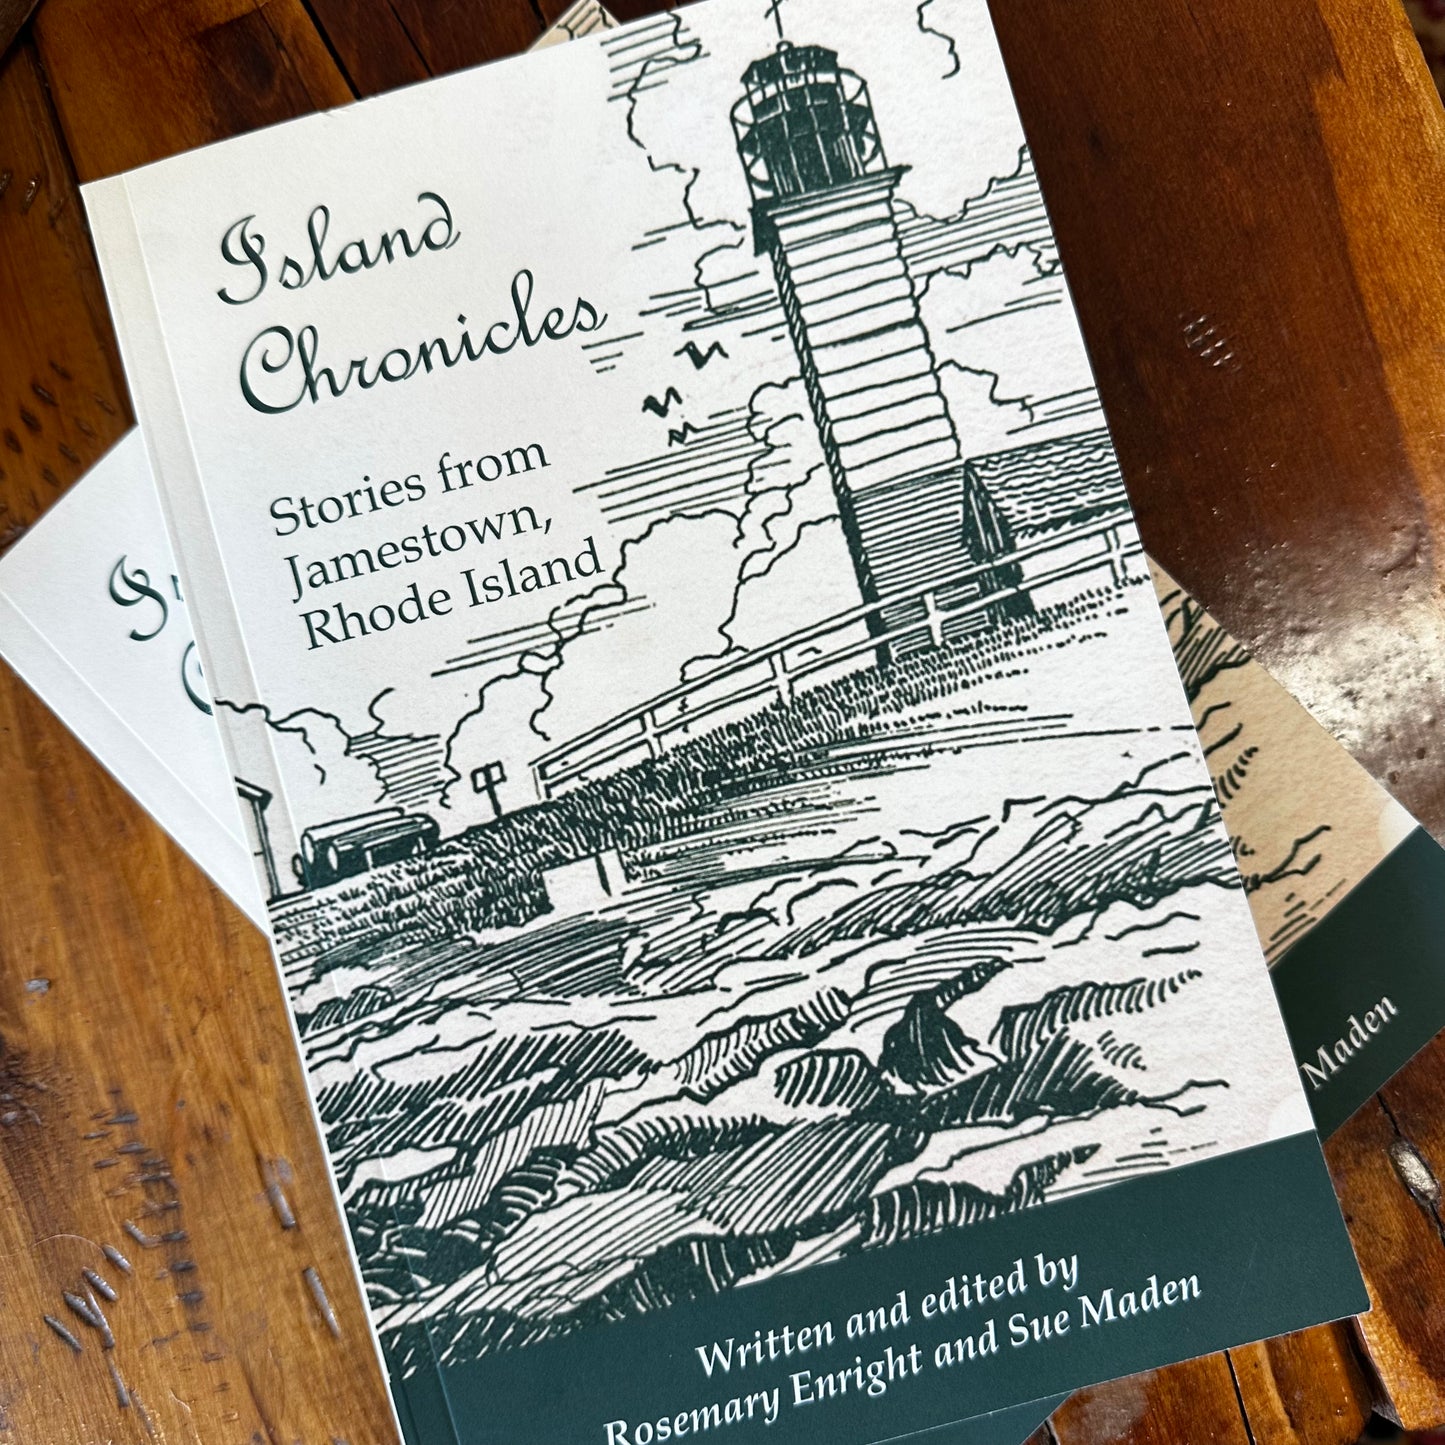 Island Chronicles: Stories from Jamestown by Rosemary Enright & Sue Maden